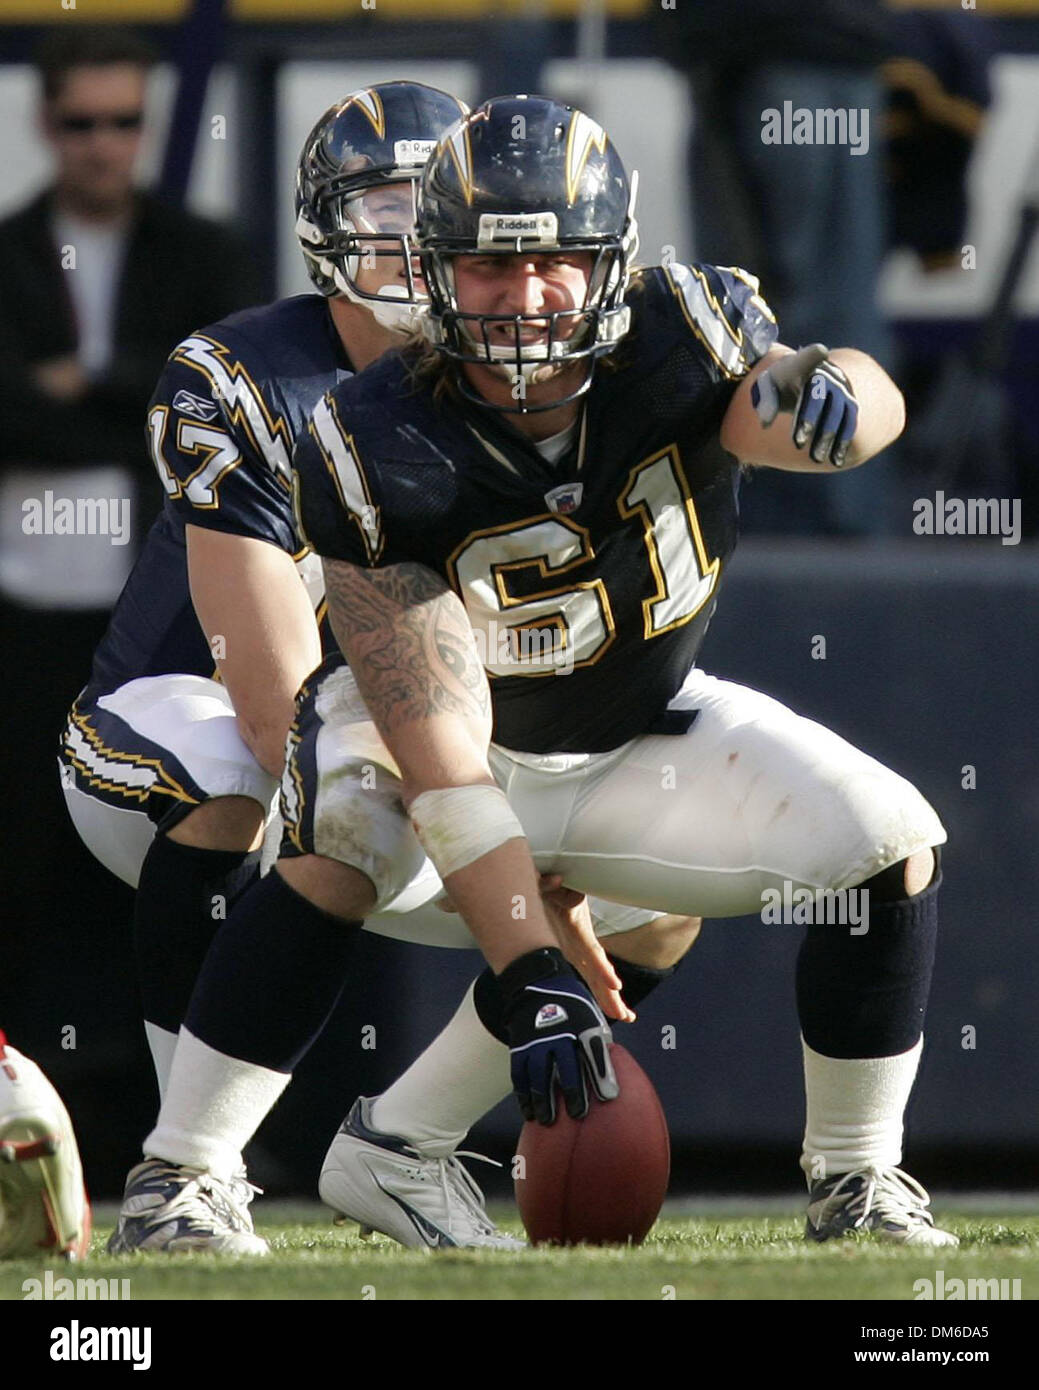 Oct 02, 2005; Foxboro, MA, USA; Chargers NICK HARDWICK points out the defense to Philip Rivers on his first play in the 3rd qtr.   Mandatory Credit: Photo by KC Alfred/San Diego Union-Tribune/ZUMA Press. (©) Copyright 2005 by San Diego Union-Tribune Stock Photo